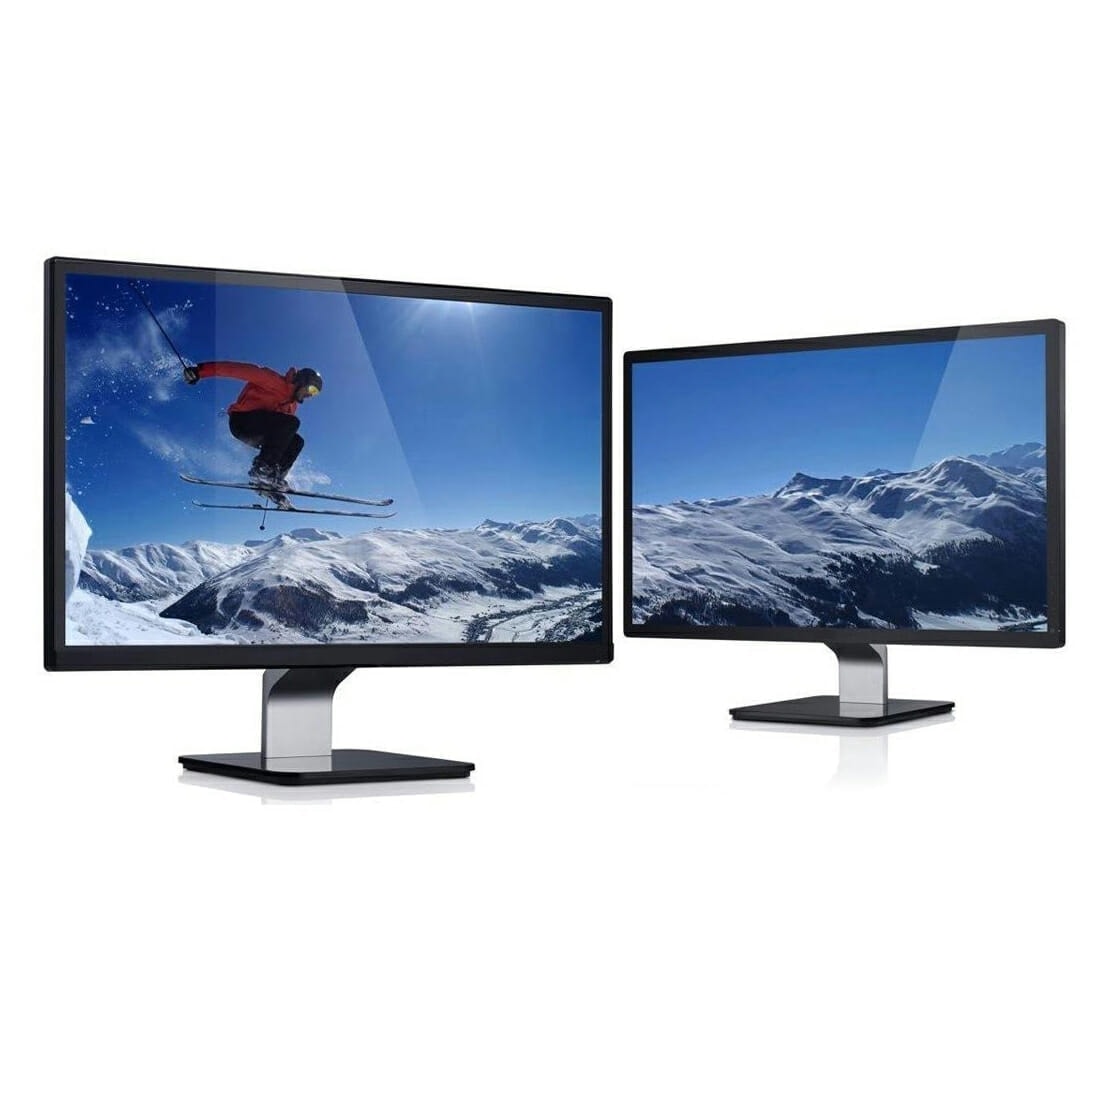 Add a 22" Wide Screen TFT Monitor to Go with Your Computer Purchase